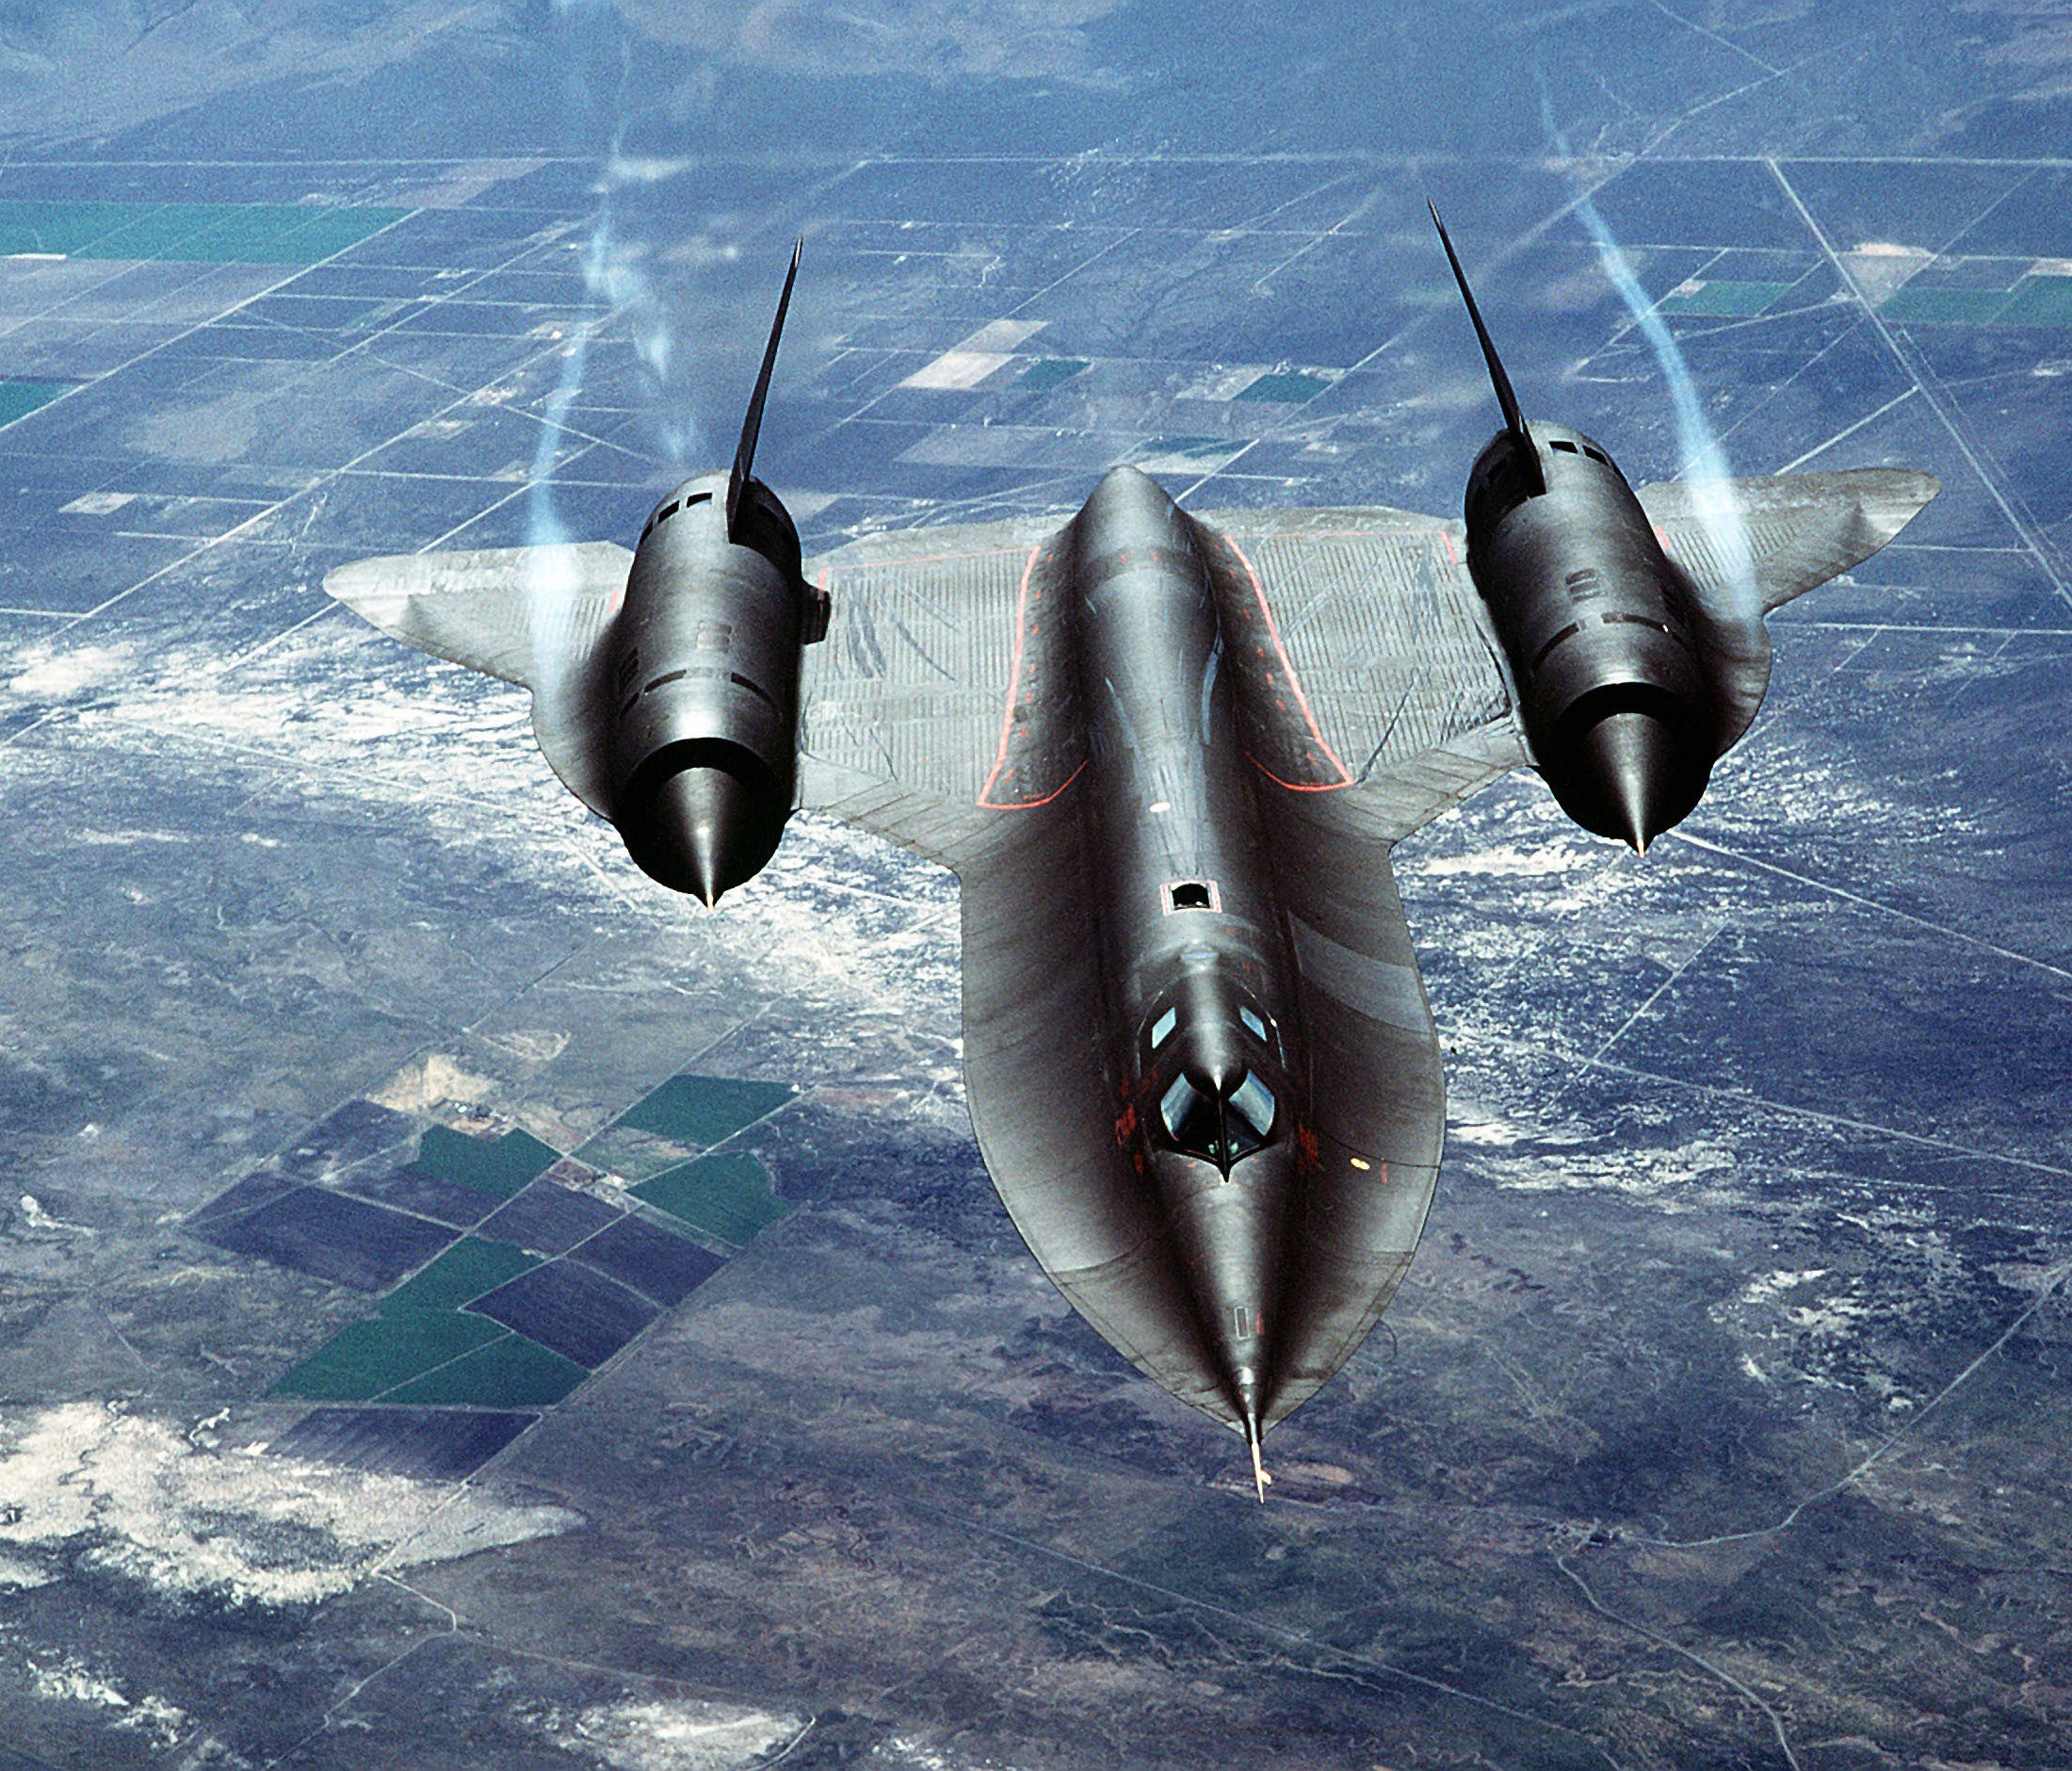 The SR-71, shown here in a file photo, routinely flew over 80,000 feet.